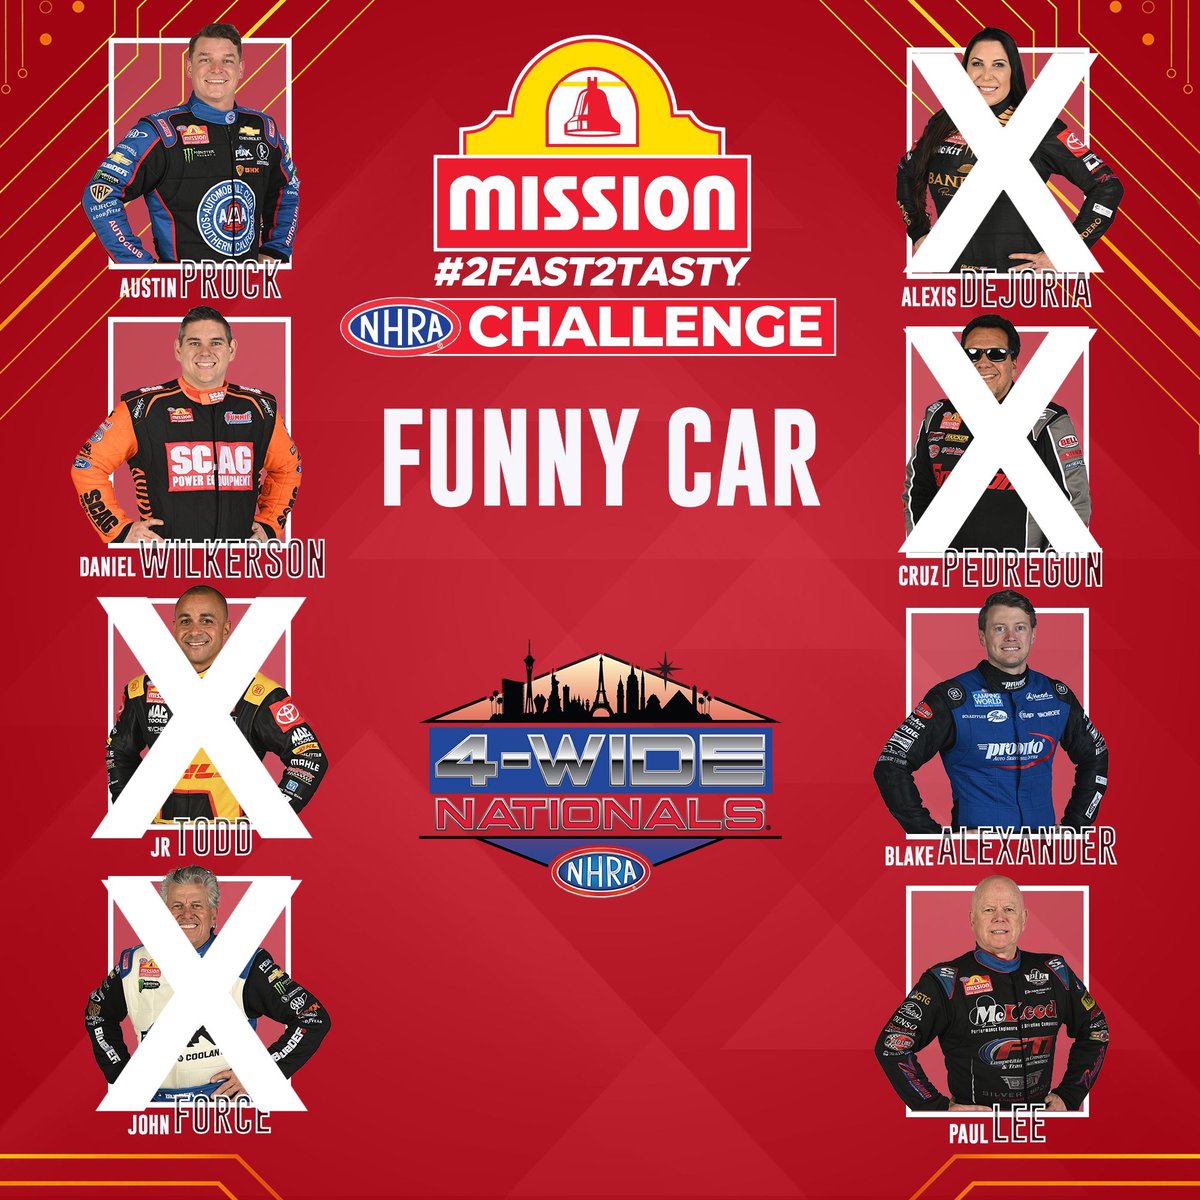 Did you bet all of your chips that this would be the Funny Car @MissionFoodsUS #2Fast2Tasty @NHRA Challenge final round here in Vegas? #Vegas4WideNats